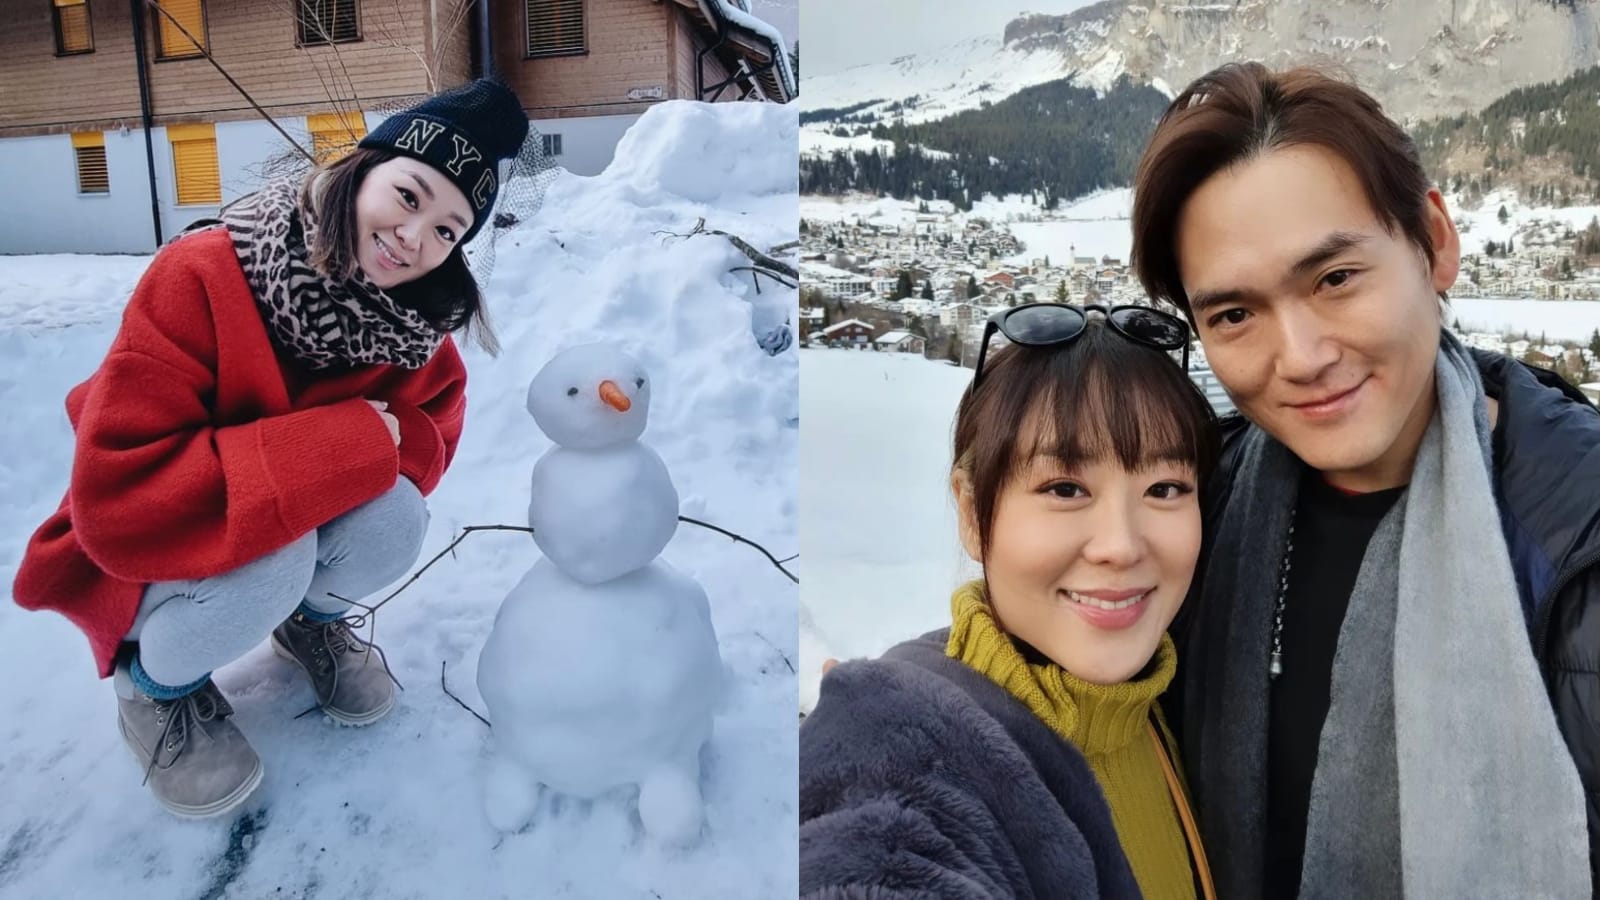 Roz Pho Booked A Chalet In Switzerland For $15K And Only Realised It Was A Scam When She Got There